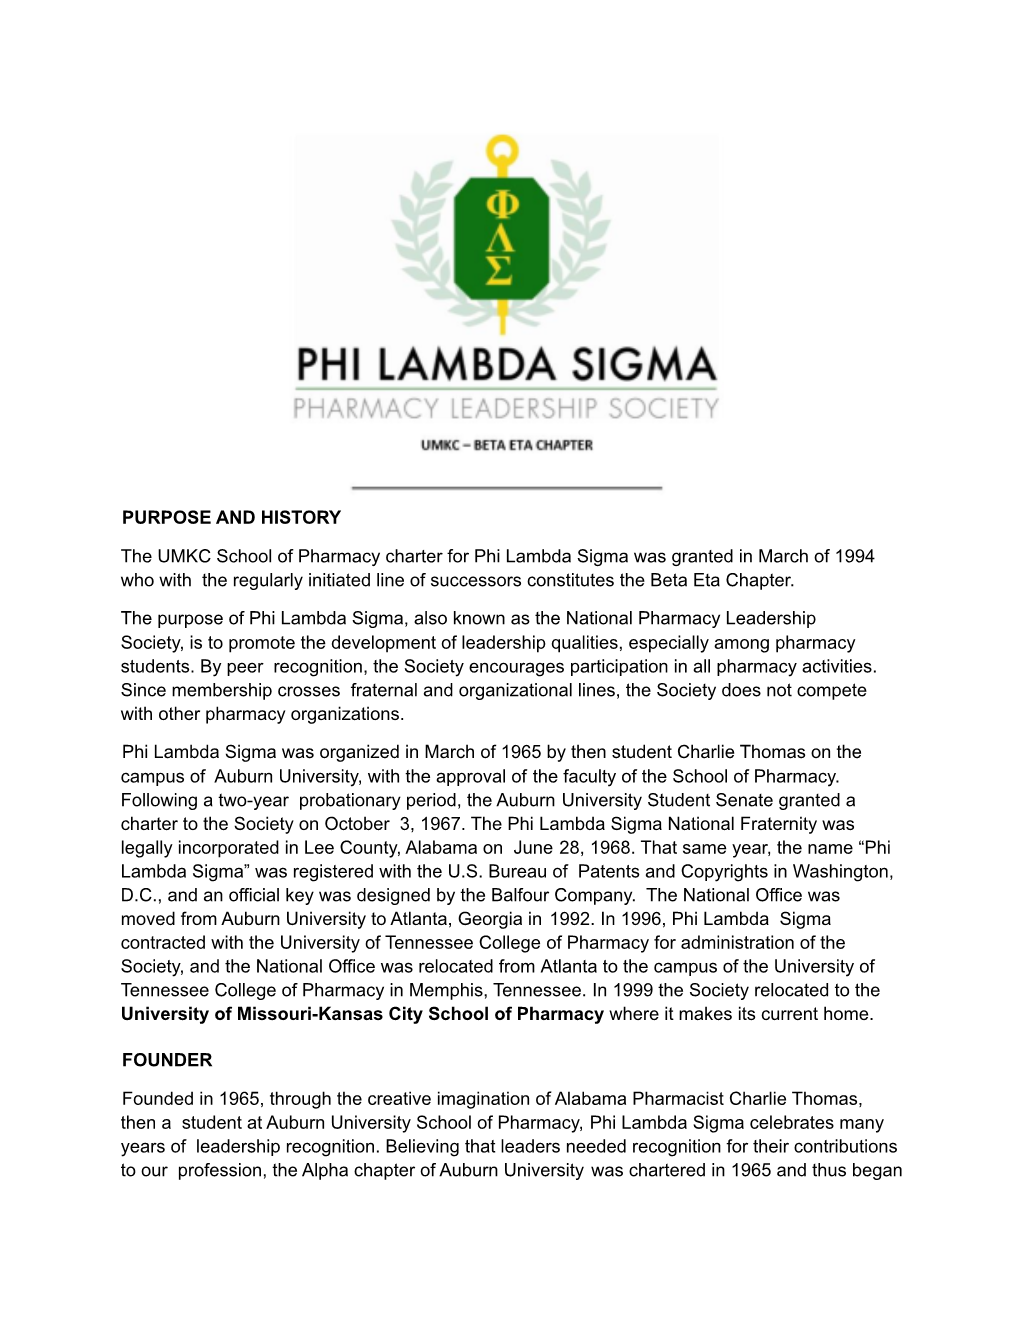 Phi Lambda Sigma Was Granted in March of 1994 Who with the Regularly Initiated Line of Successors Constitutes the Beta Eta Chapter